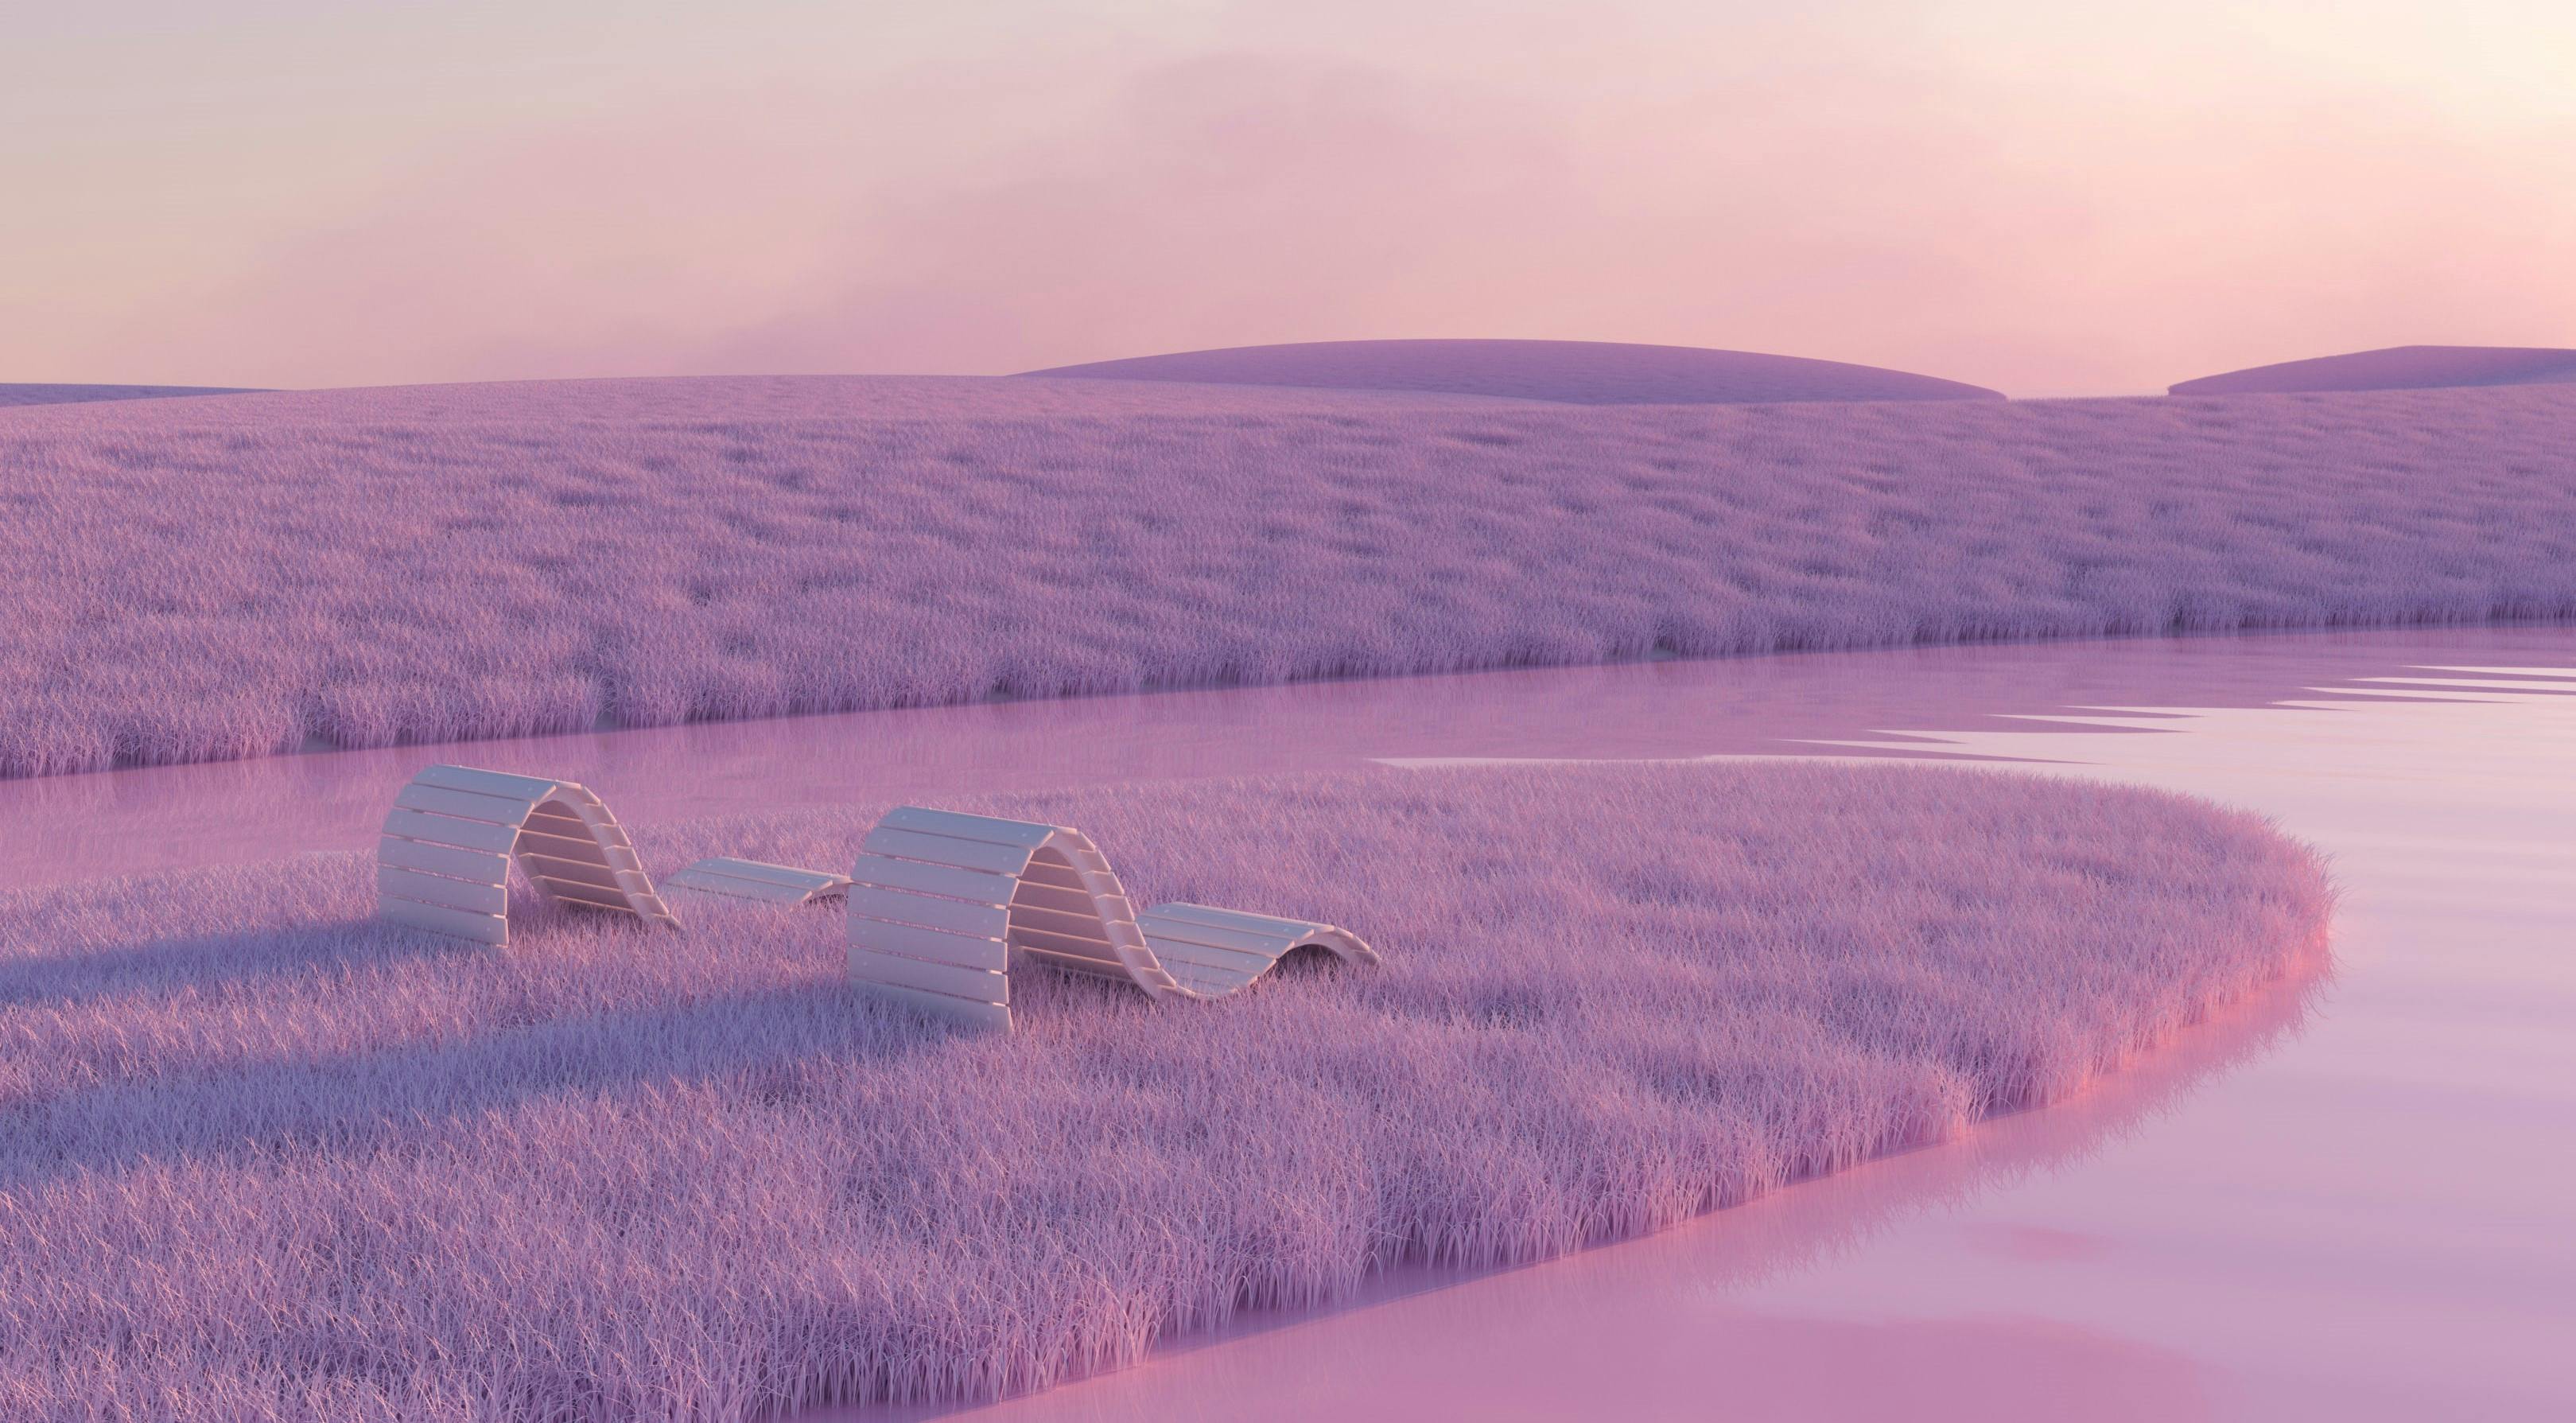 A photo of a digital world with no metaverse users. The world has pink rolling hills and a pink lake. there are two empty lounge chairs. 